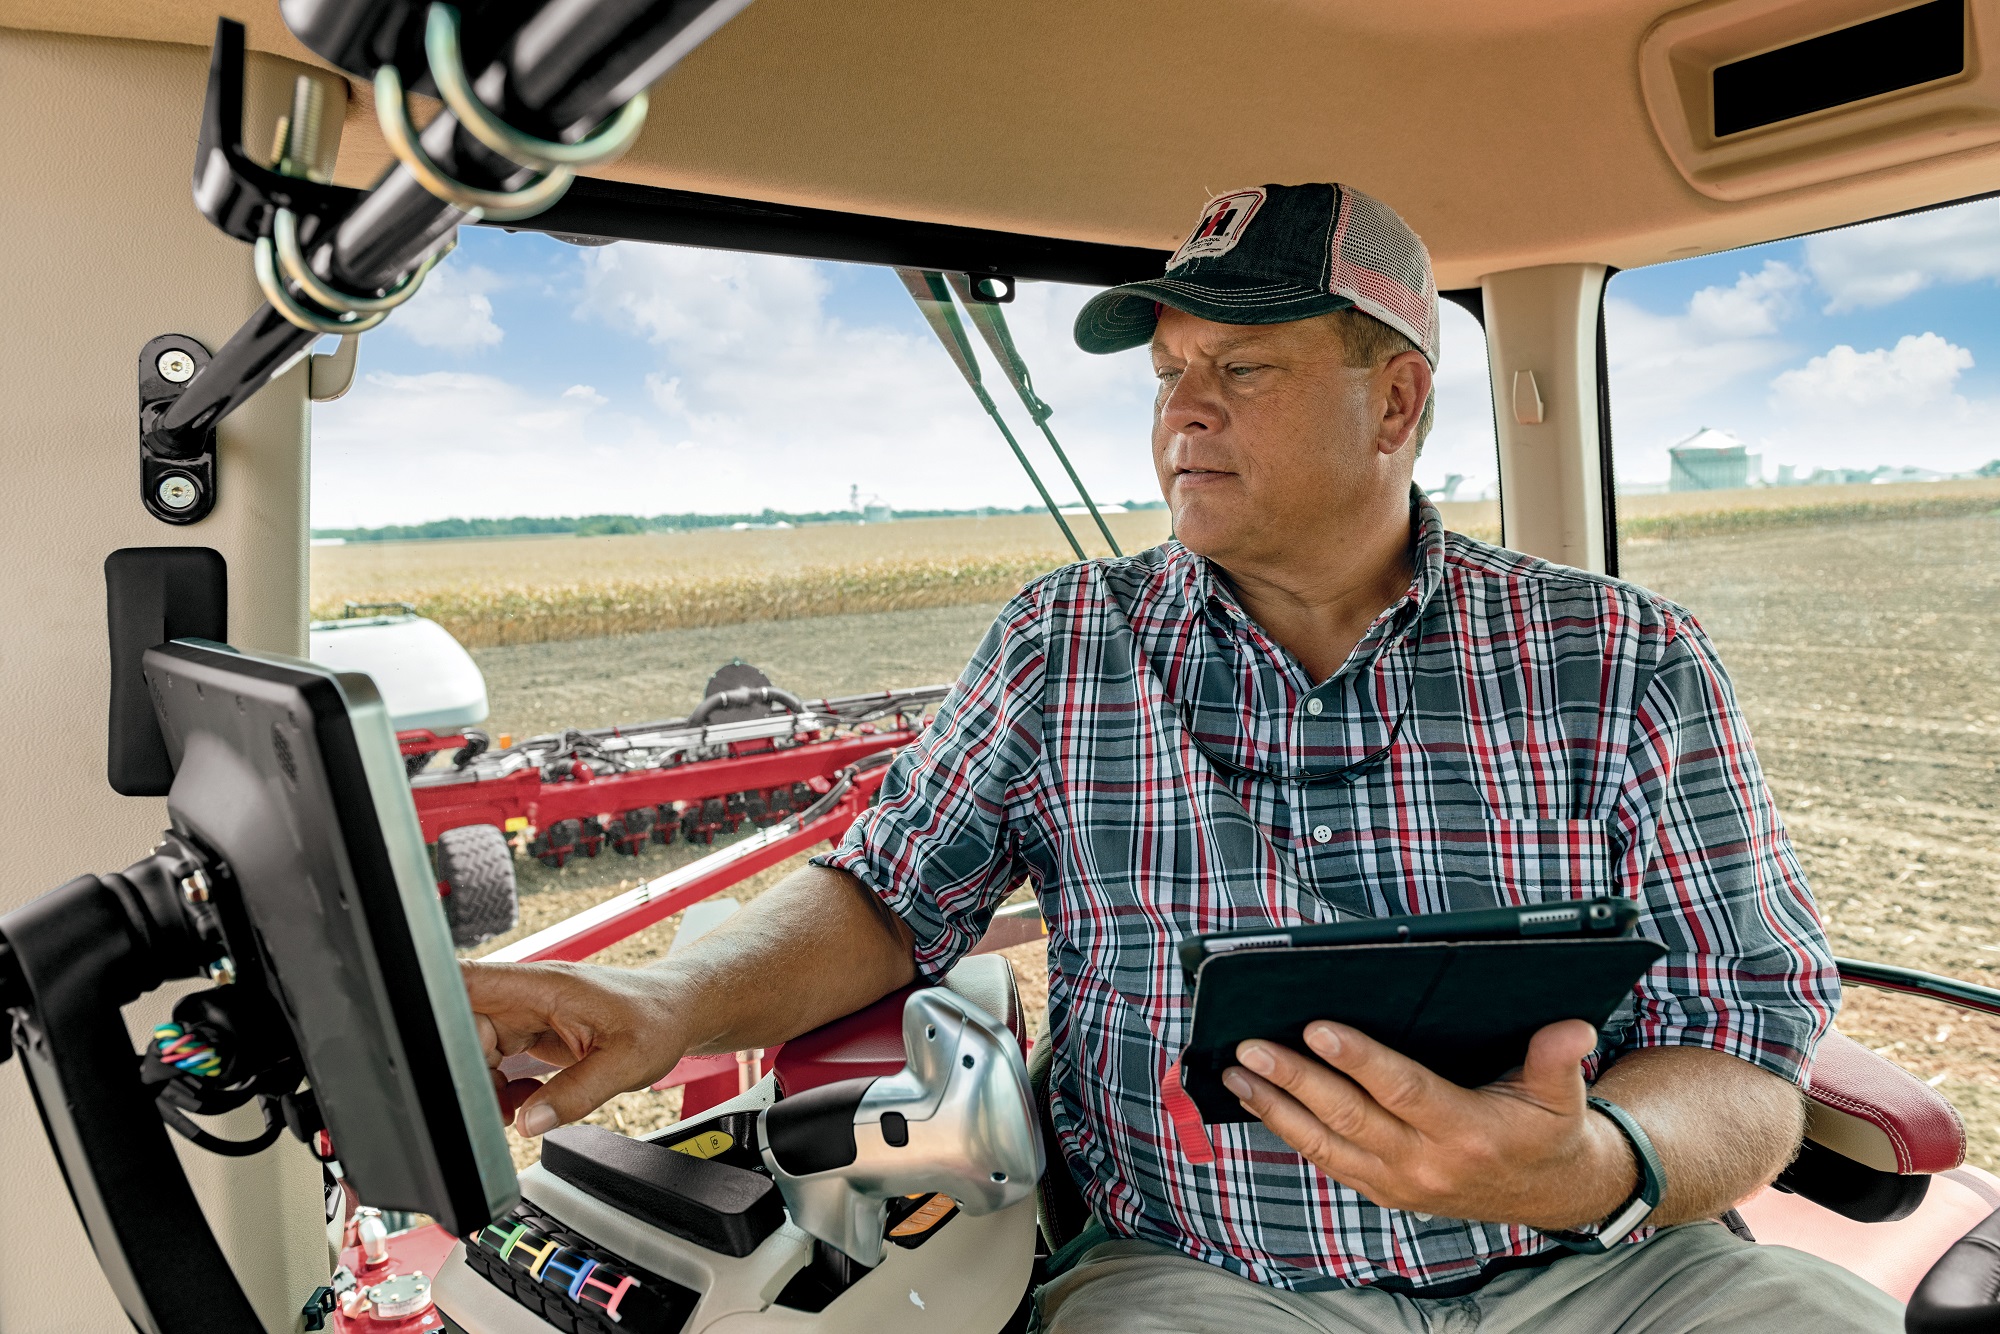 AFBF Signs Right to Repair MOU with Case IH and New Holland, News Release